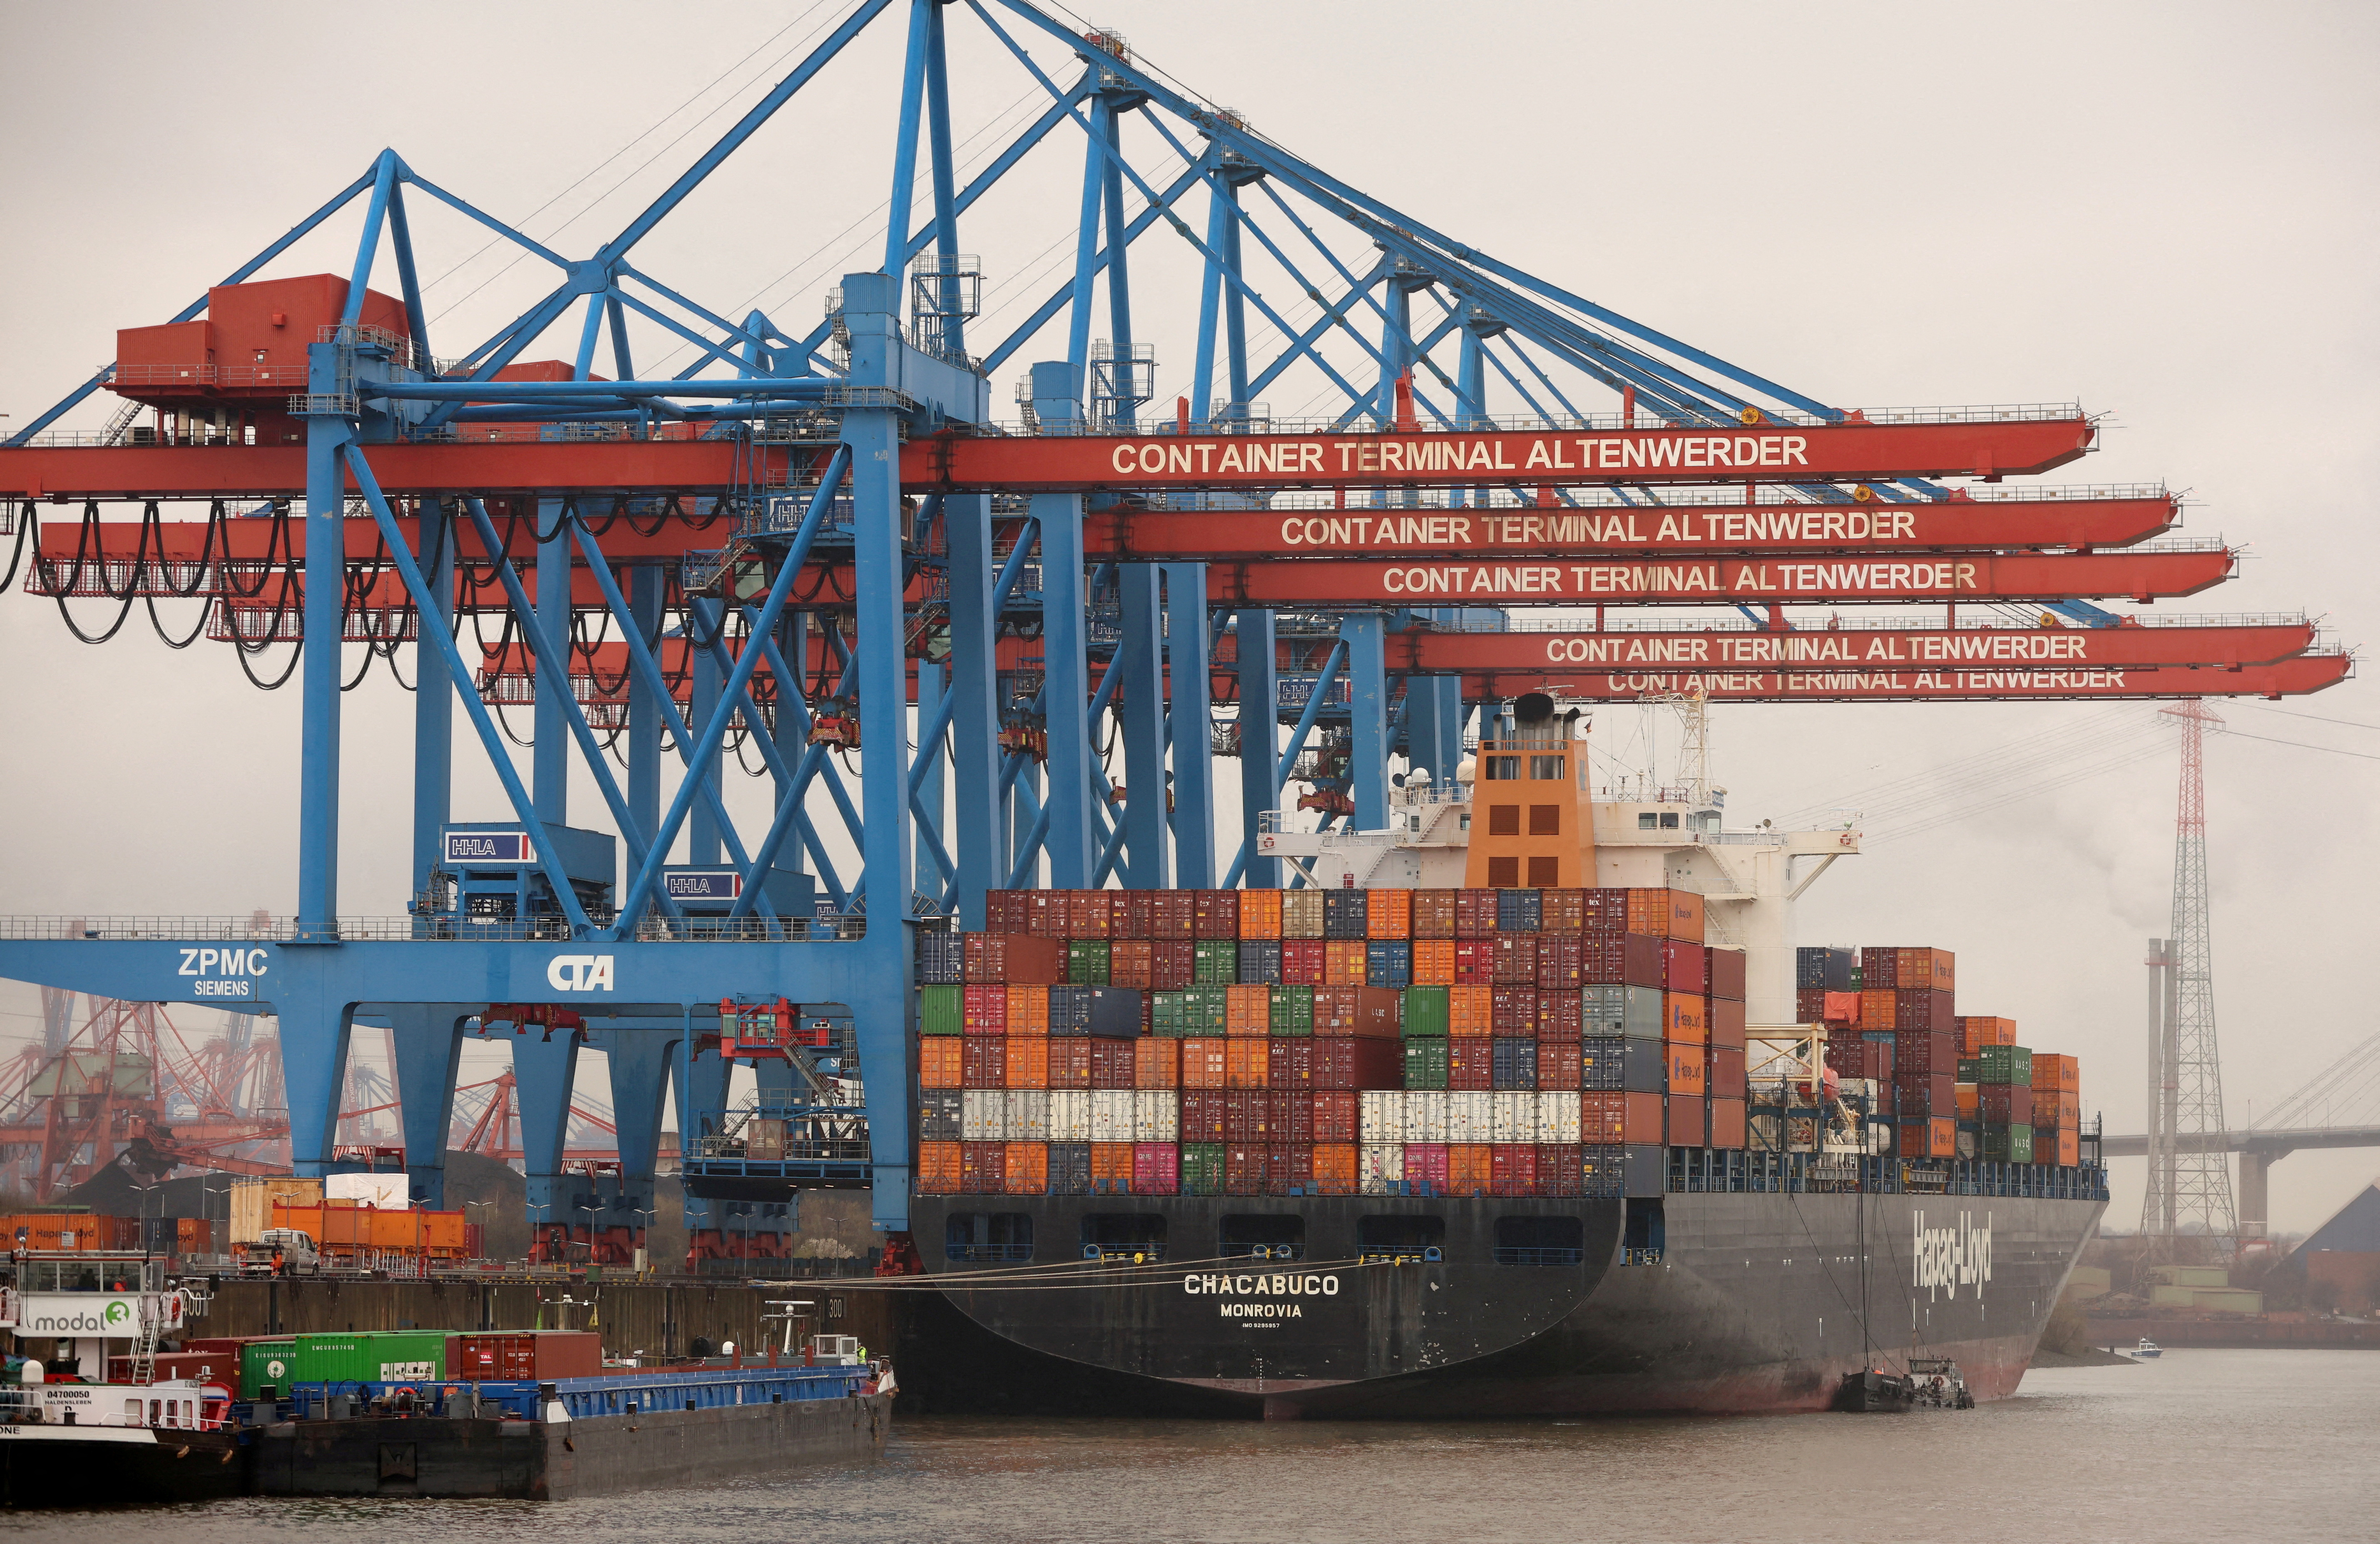 Containers are unloaded at the HHLA Container Terminal Altenwerder on the River Elbe in Hamburg, Germany